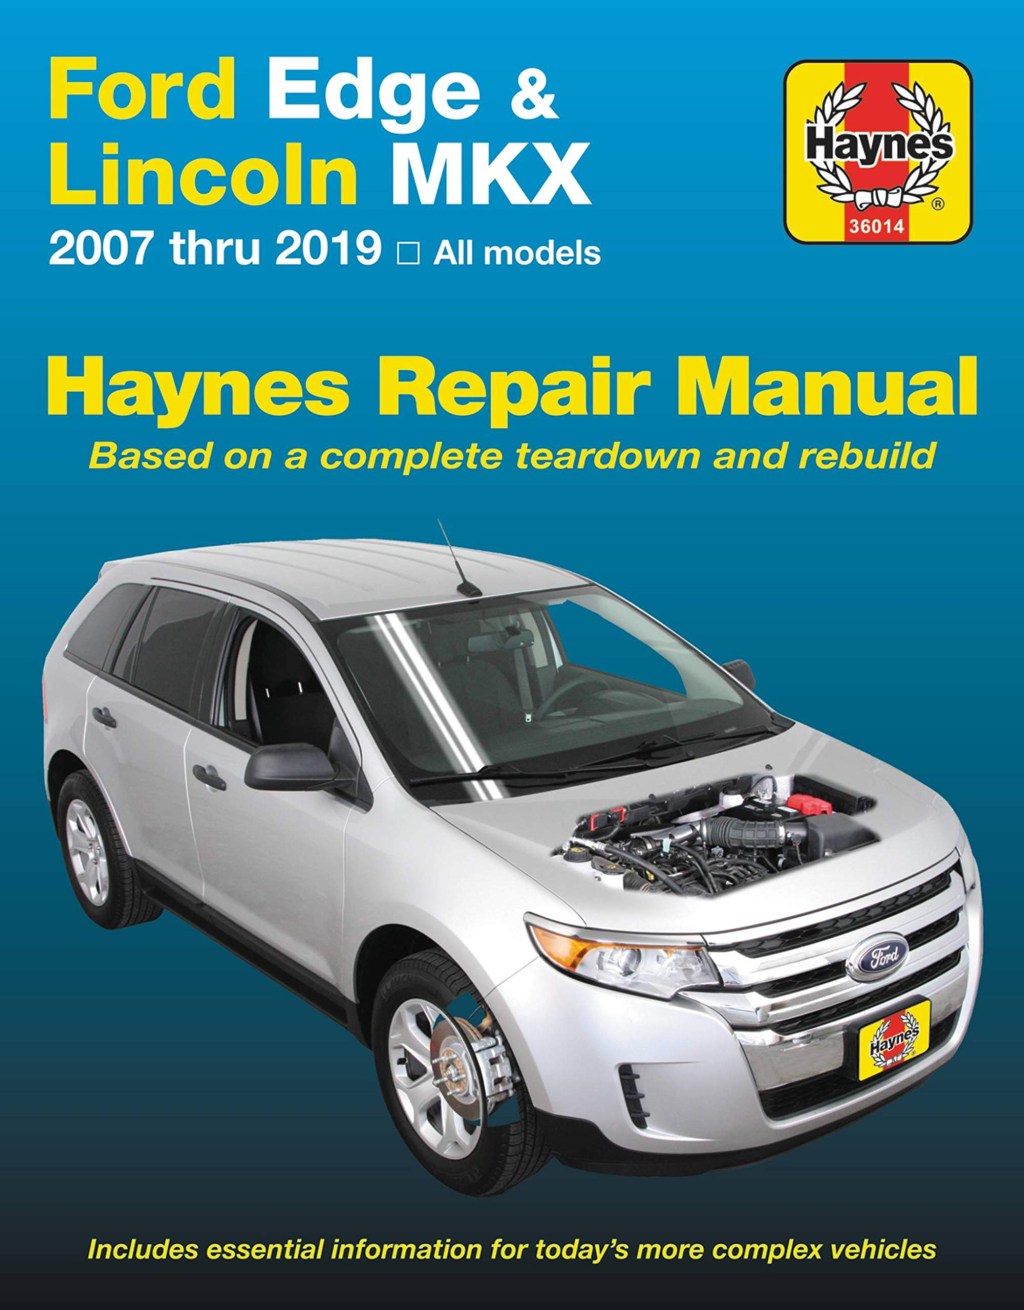 Picture of: Ford Edge (-) & Lincoln MKX (-) Haynes Repair Manual (Paperback)